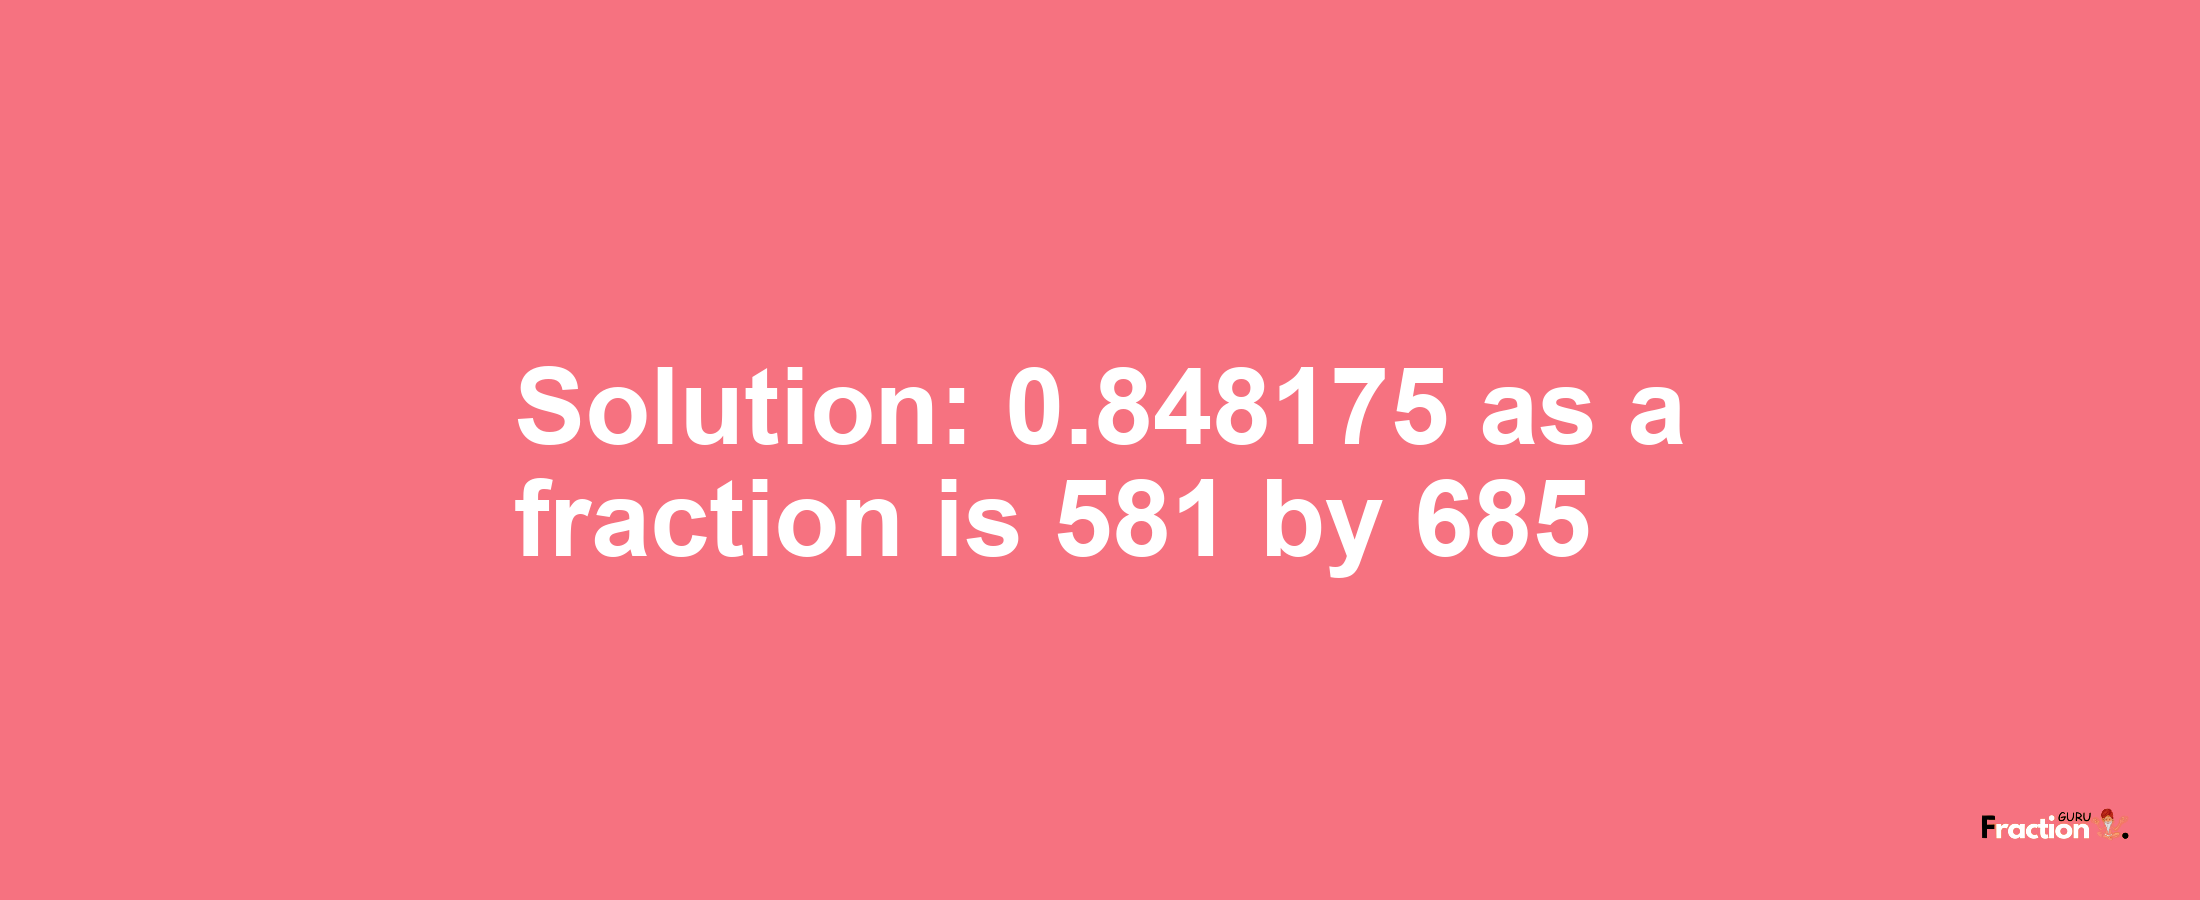 Solution:0.848175 as a fraction is 581/685